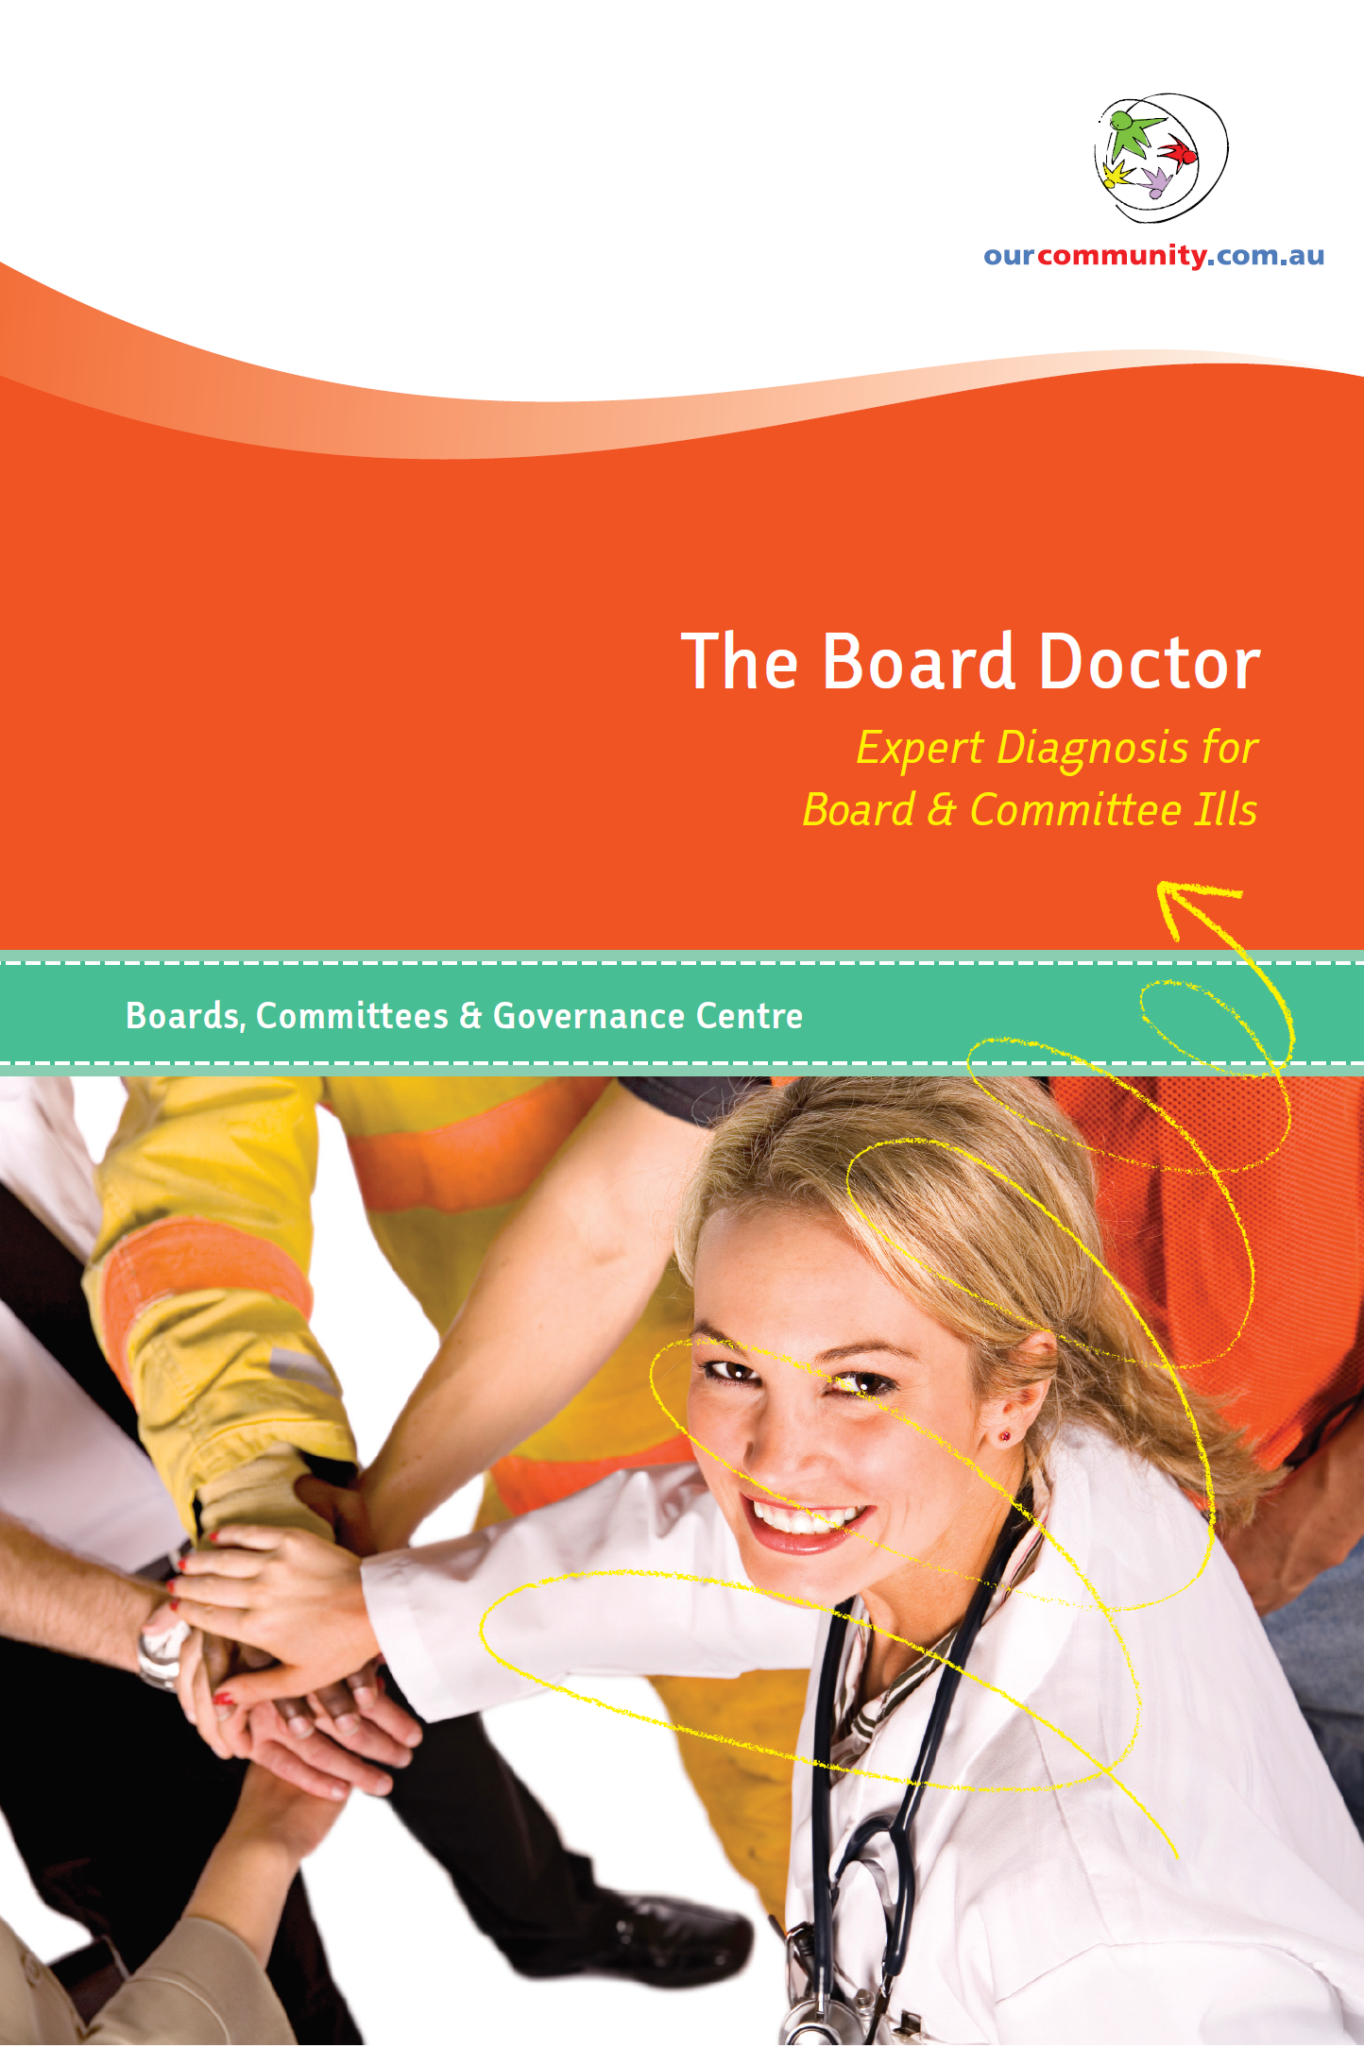 The Board Doctor: Expert Diagnosis for Board & Committee Ills